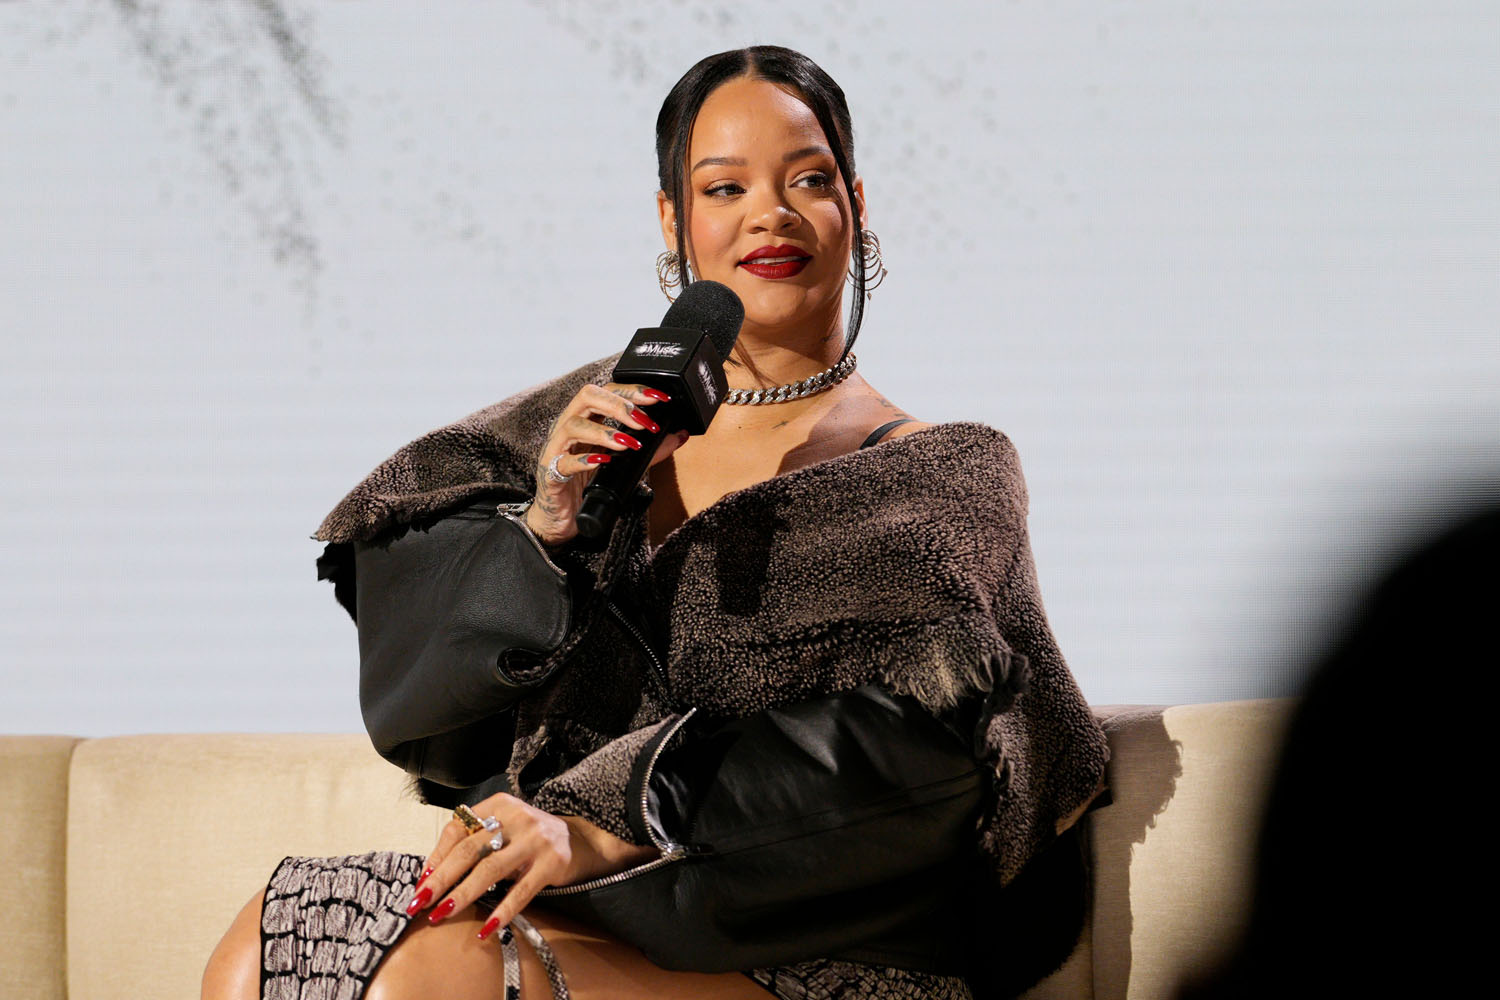 Rihanna confirms during the Super Bowl Halftime show press conference